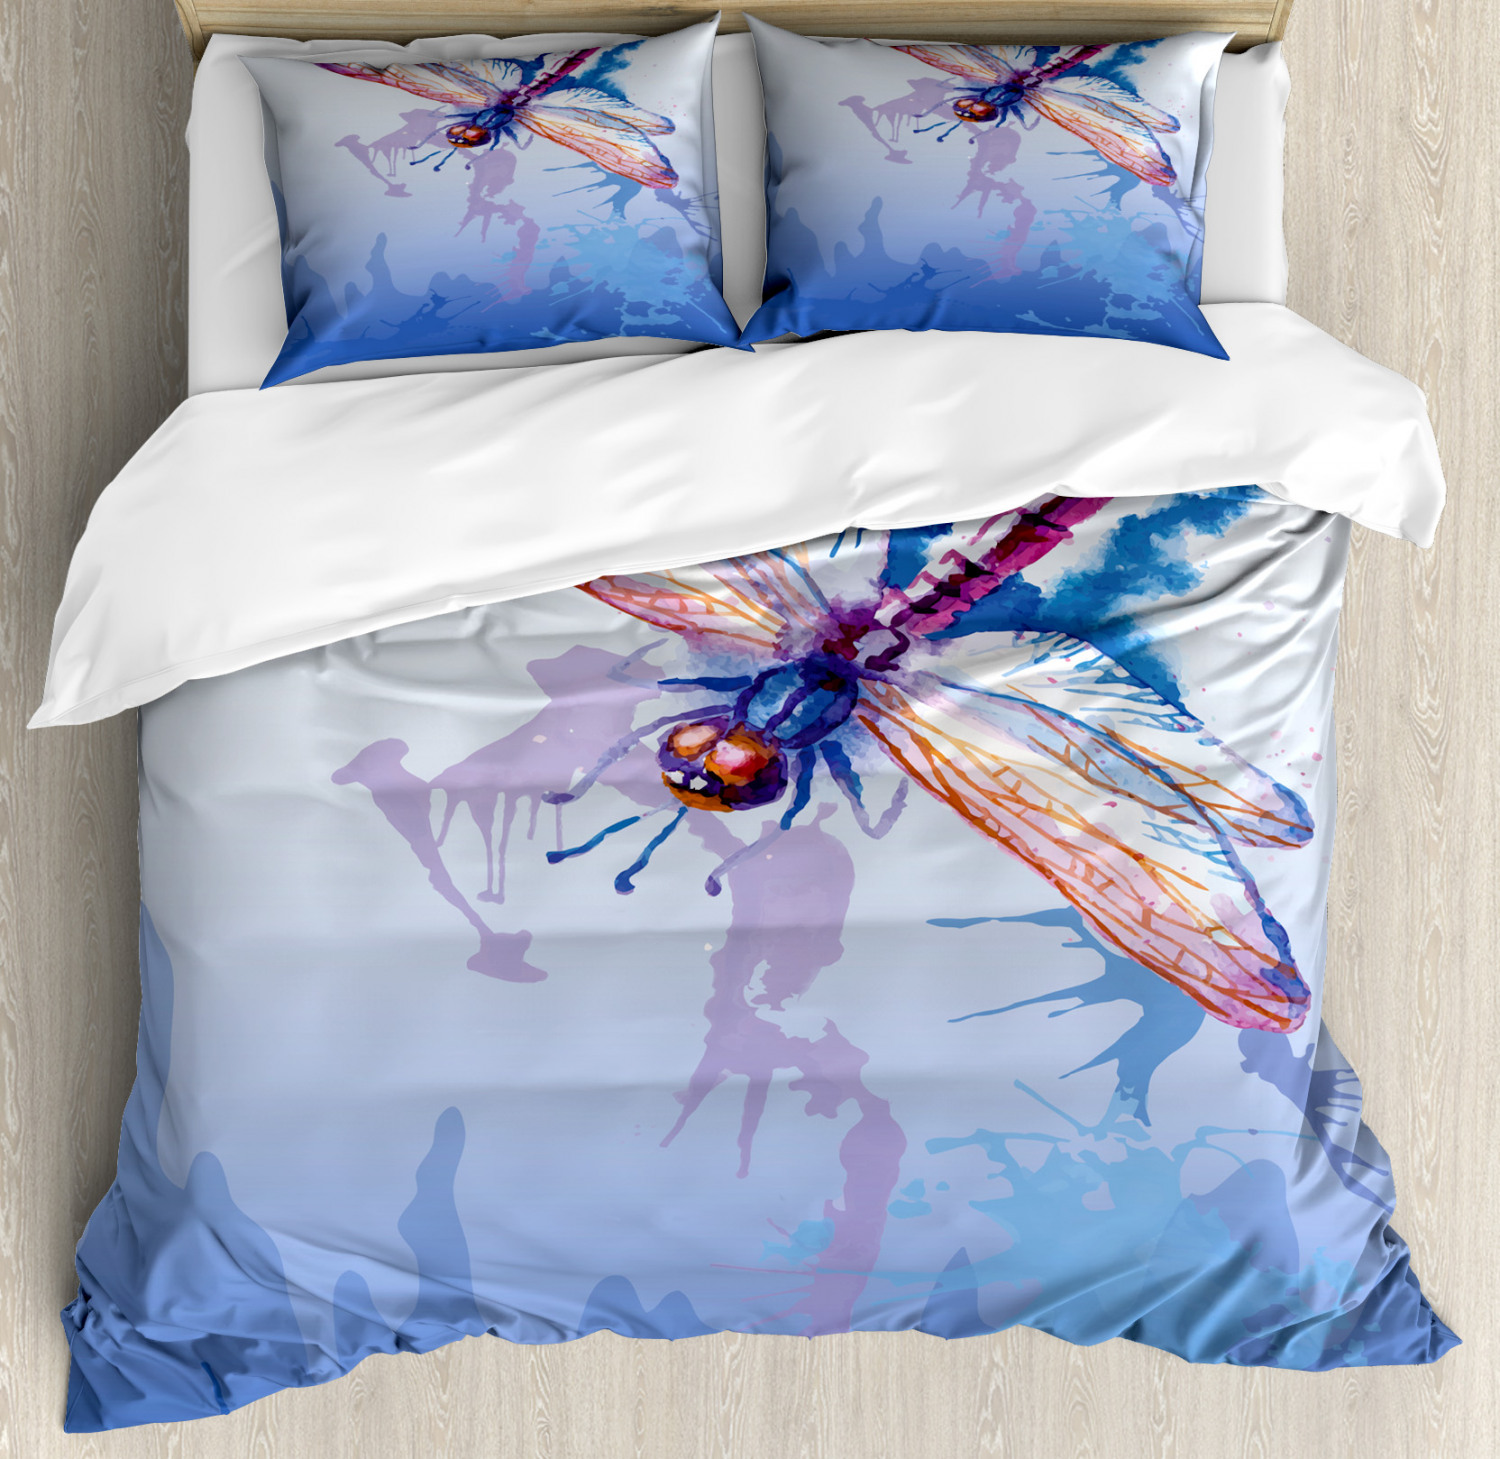 Colorful Duvet Cover Set With Pillow Shams Abstract Dragonfly Print